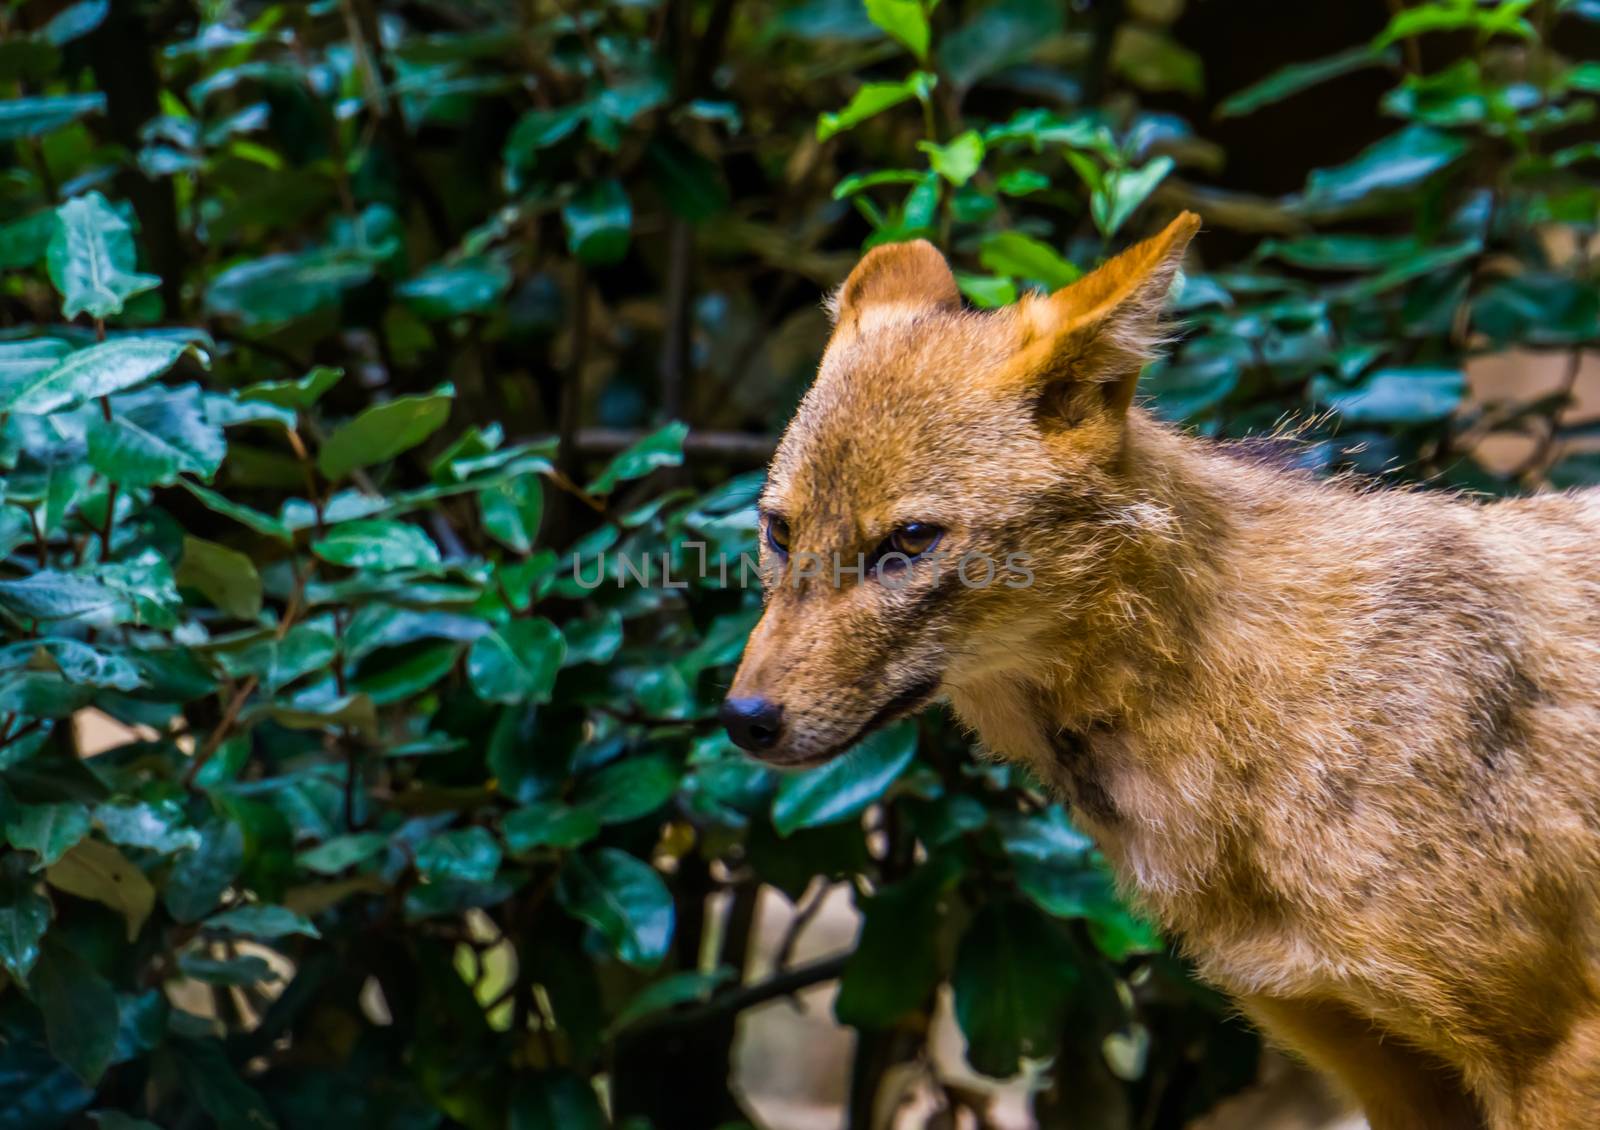 the face of a golden jackal in closeup, wild dog specie from Eurasia by charlottebleijenberg